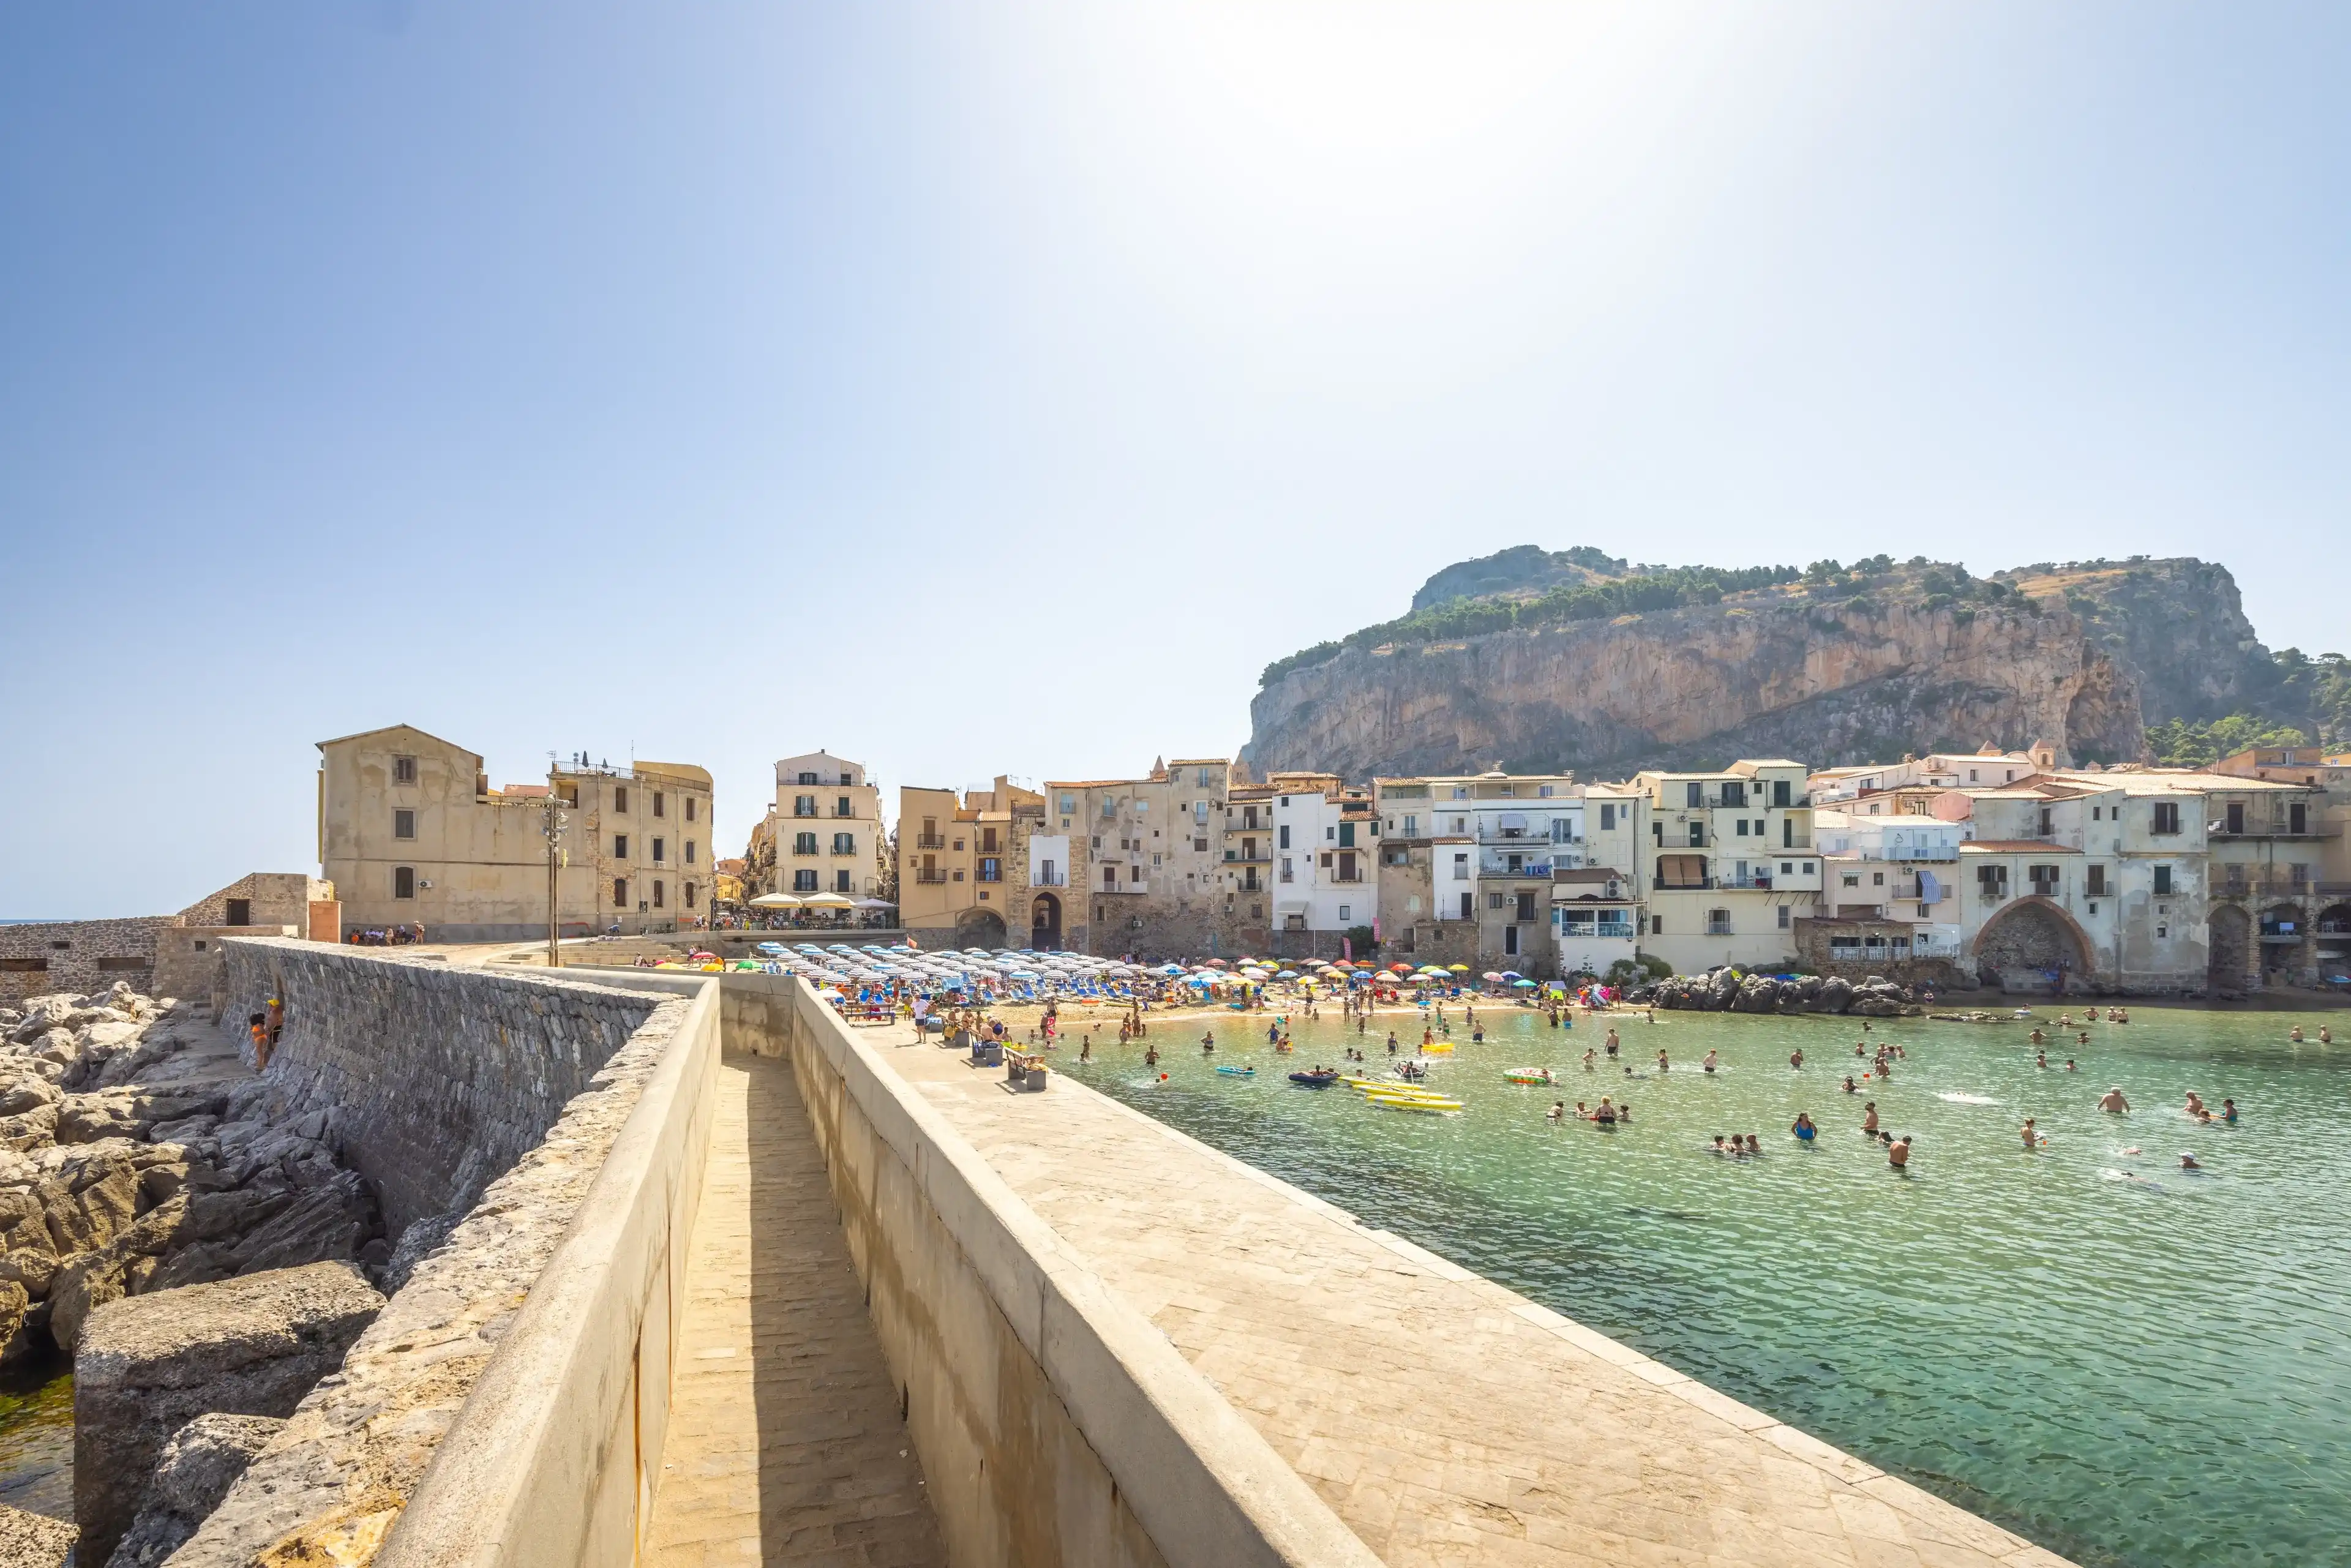 Best Cefalù hotels. Cheap hotels in Cefalù, Italy